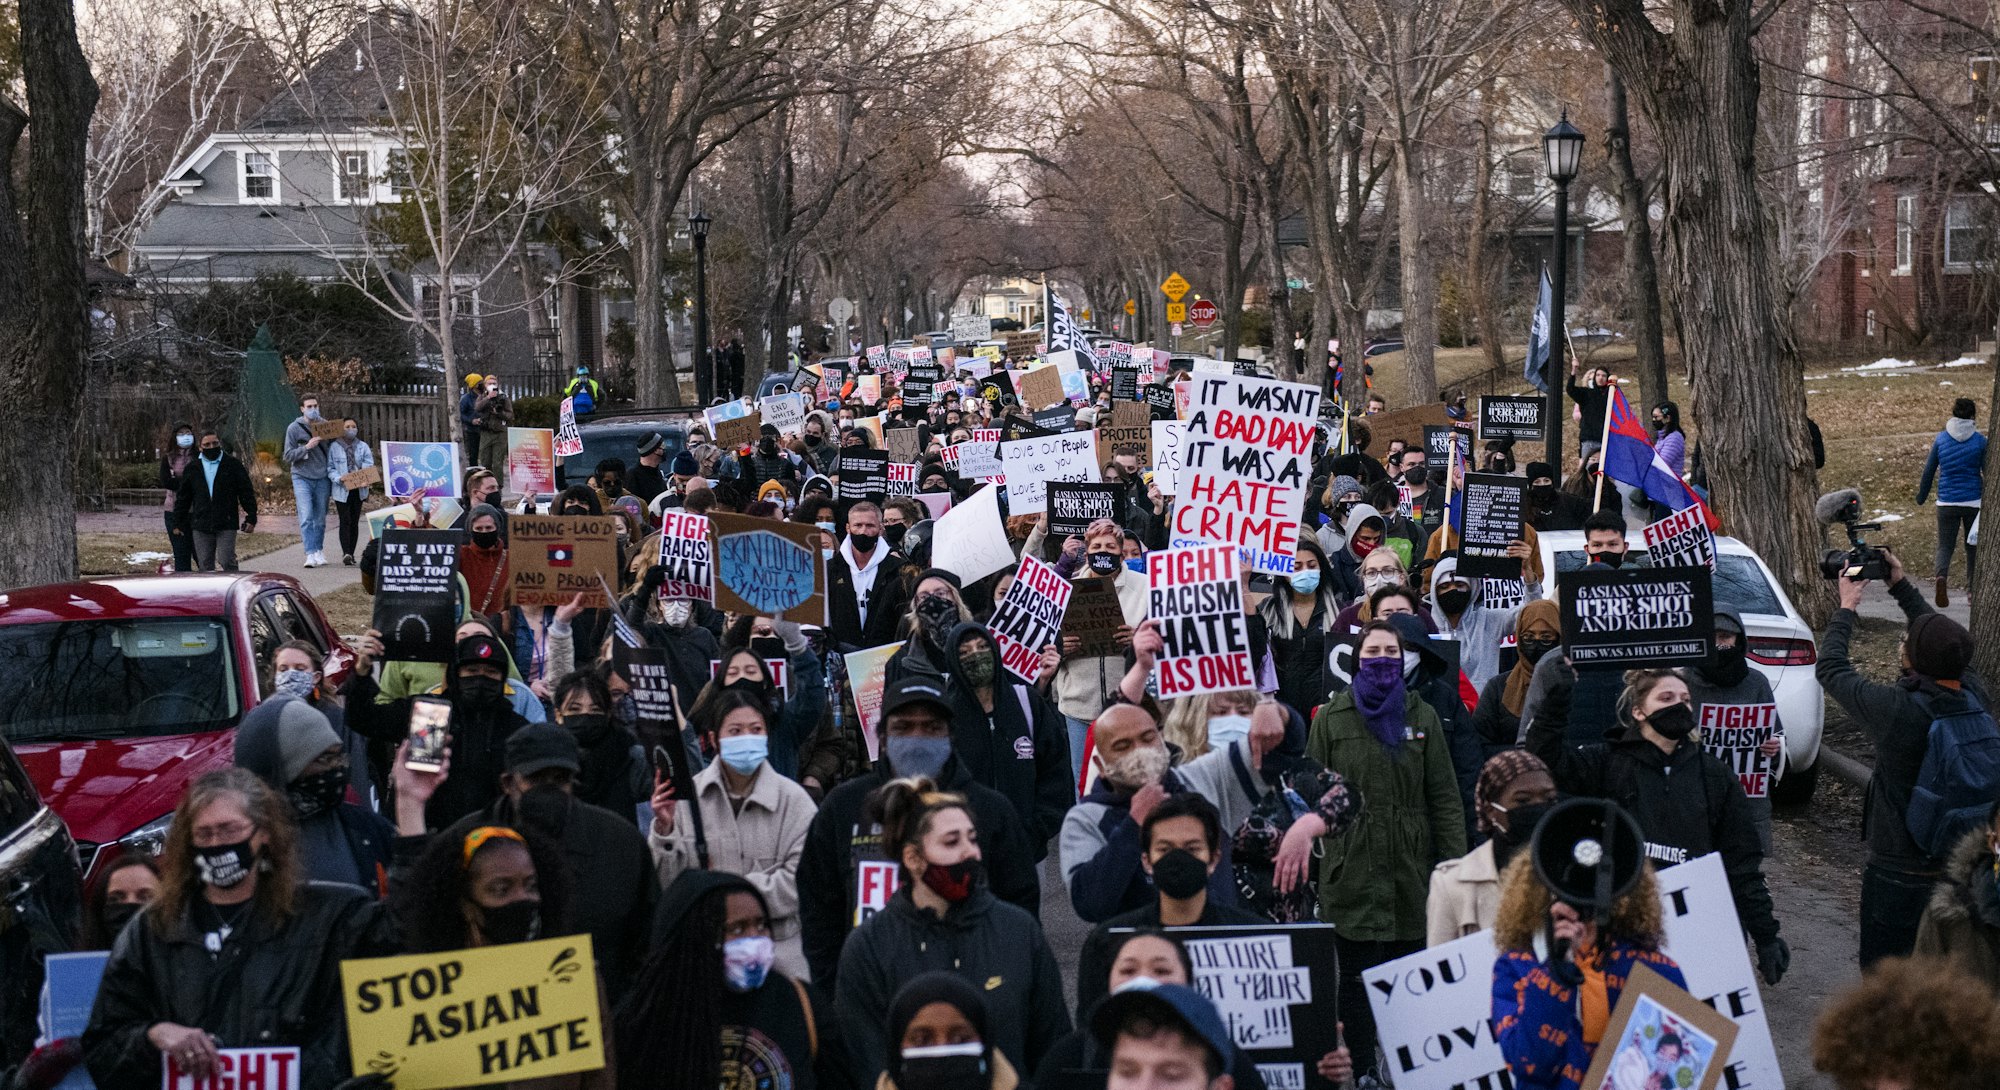 MINNEAPOLIS, MN - MARCH 18: People march through a neighborhood to protest against anti-Asian violen...